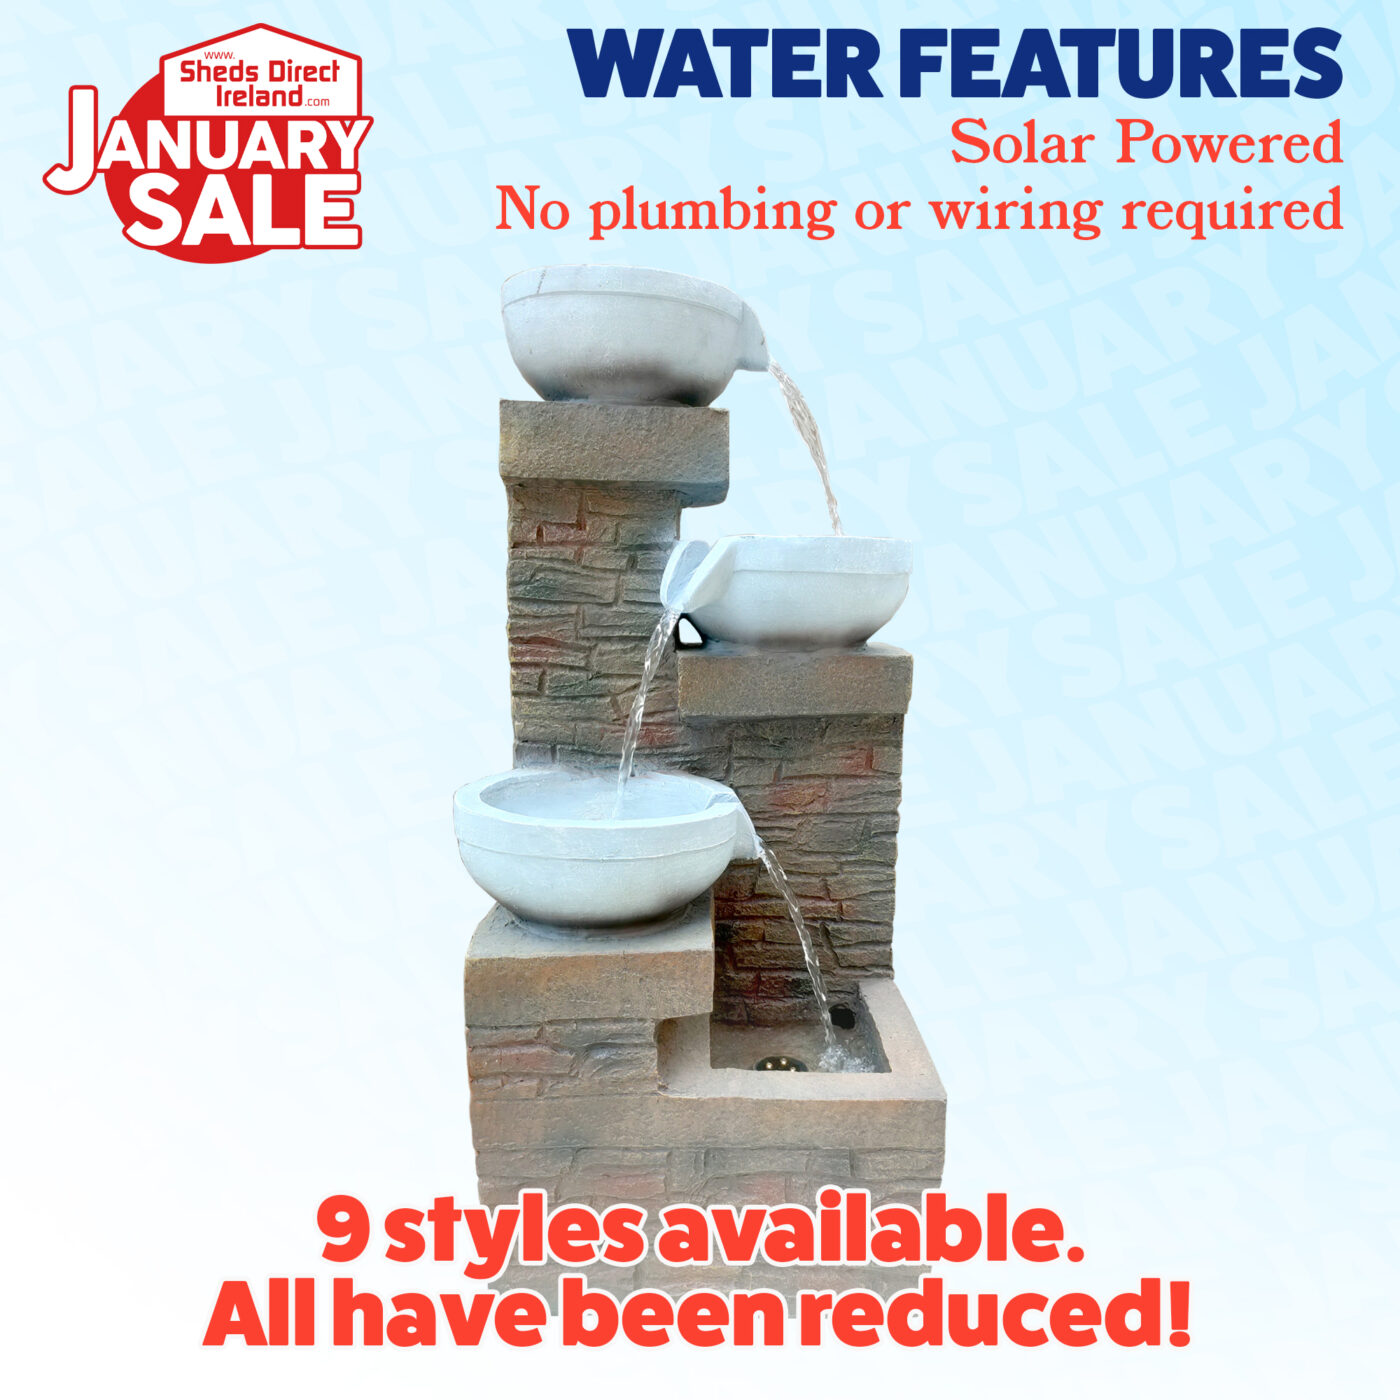 January Sale - Water Features